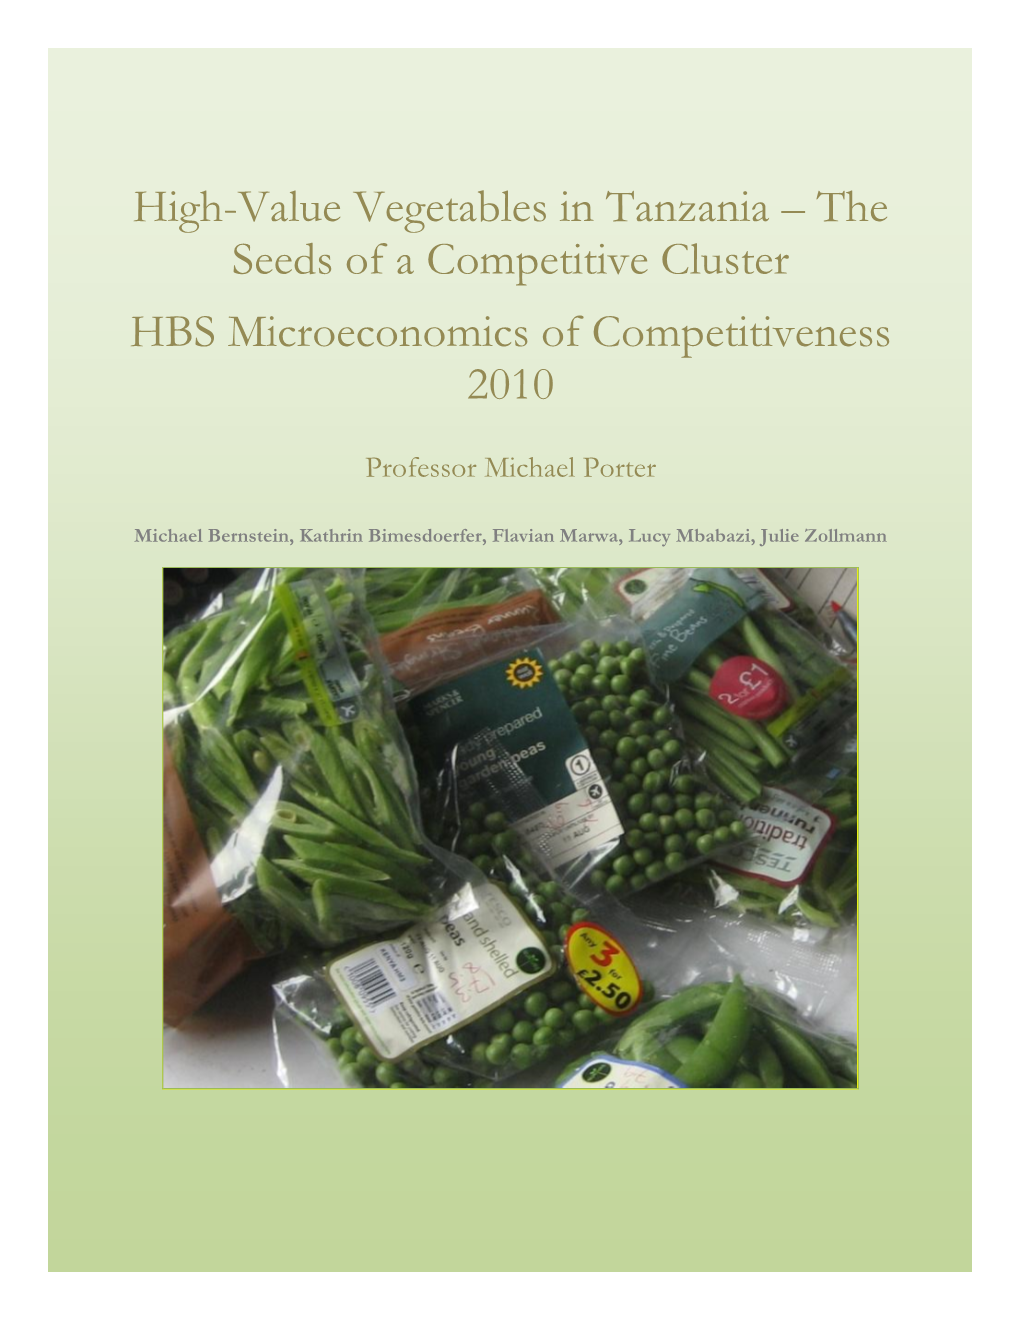 High-Value Vegetables in Tanzania – the Seeds of a Competitive Cluster HBS Microeconomics of Competitiveness 2010